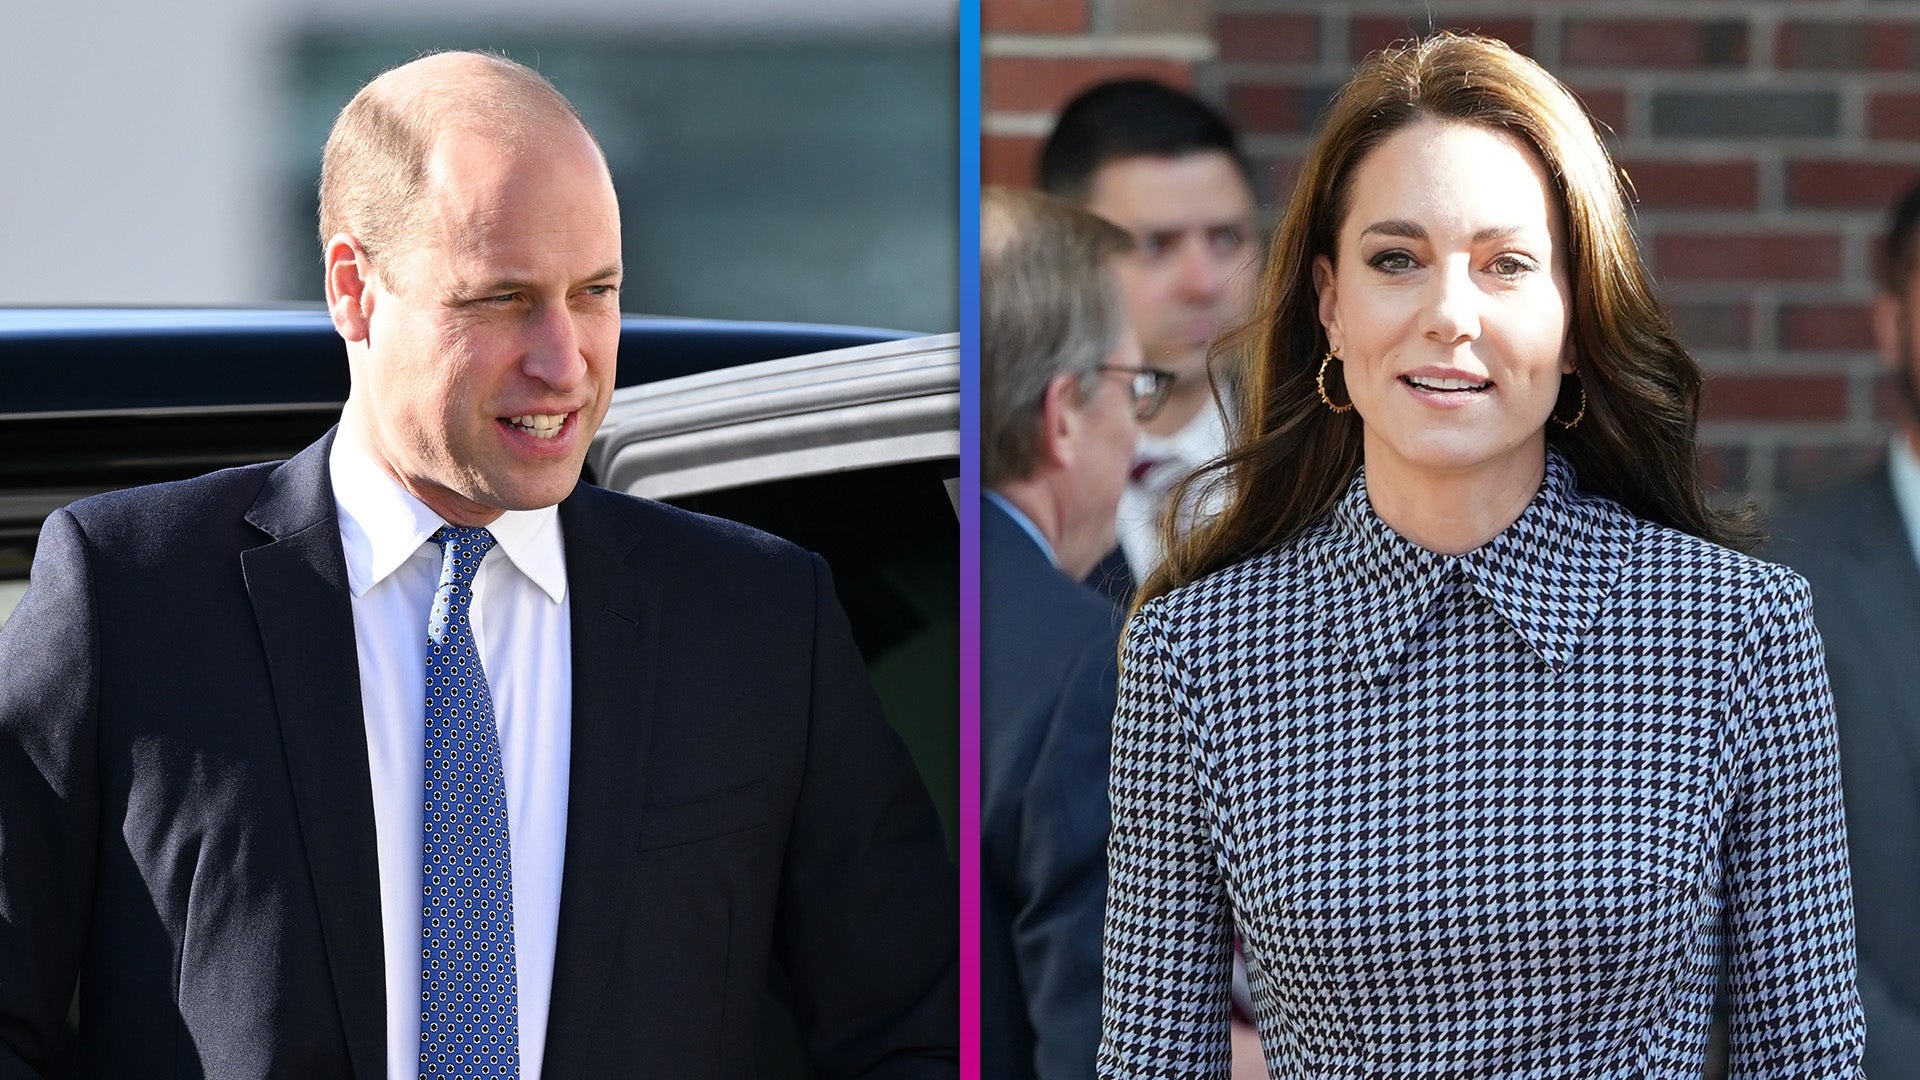 Prince William and Kate Middleton in Boston: JFK Library and Harvard Visits